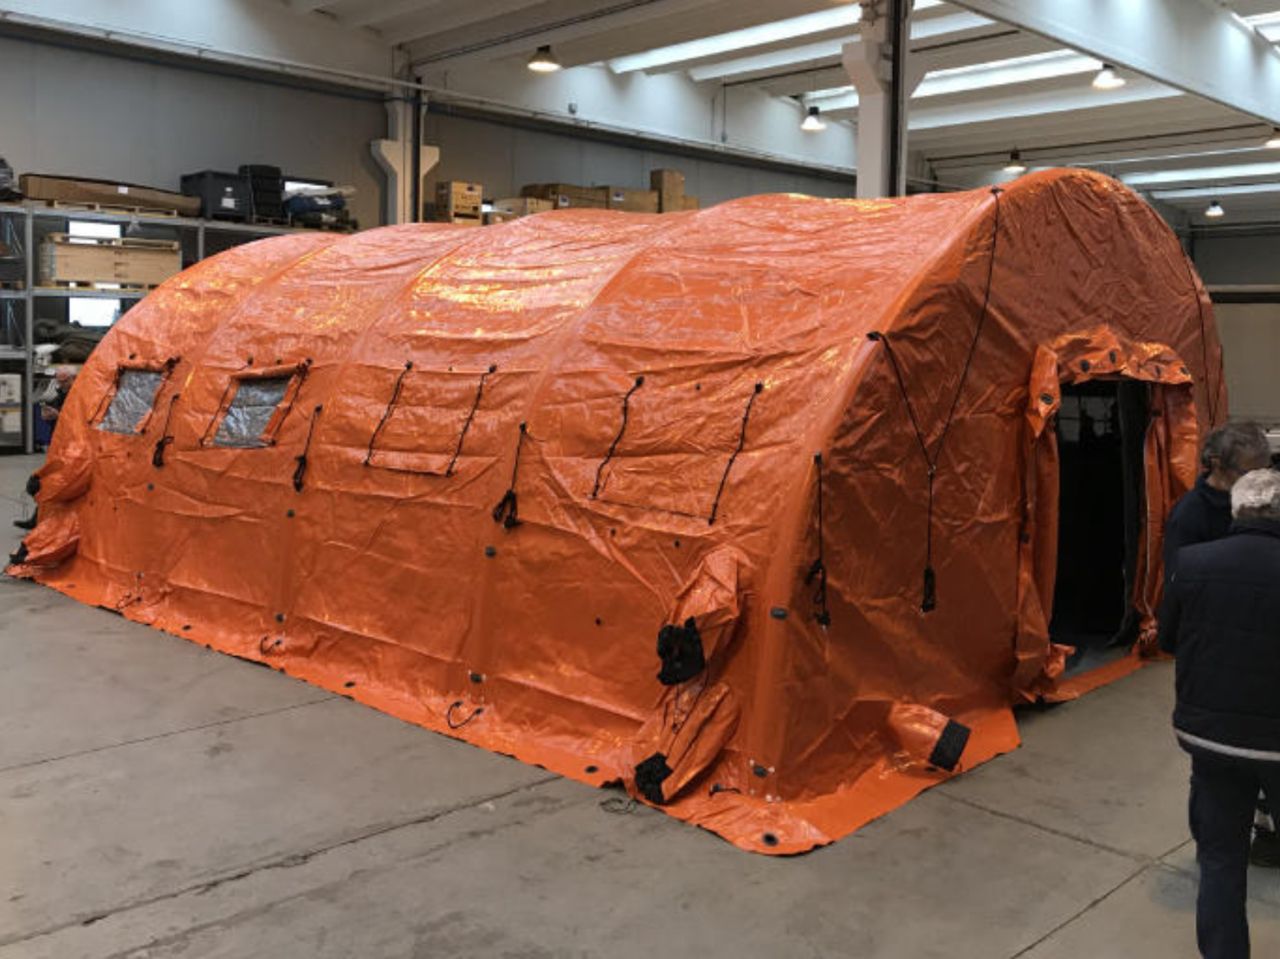 Inflated emergency tent